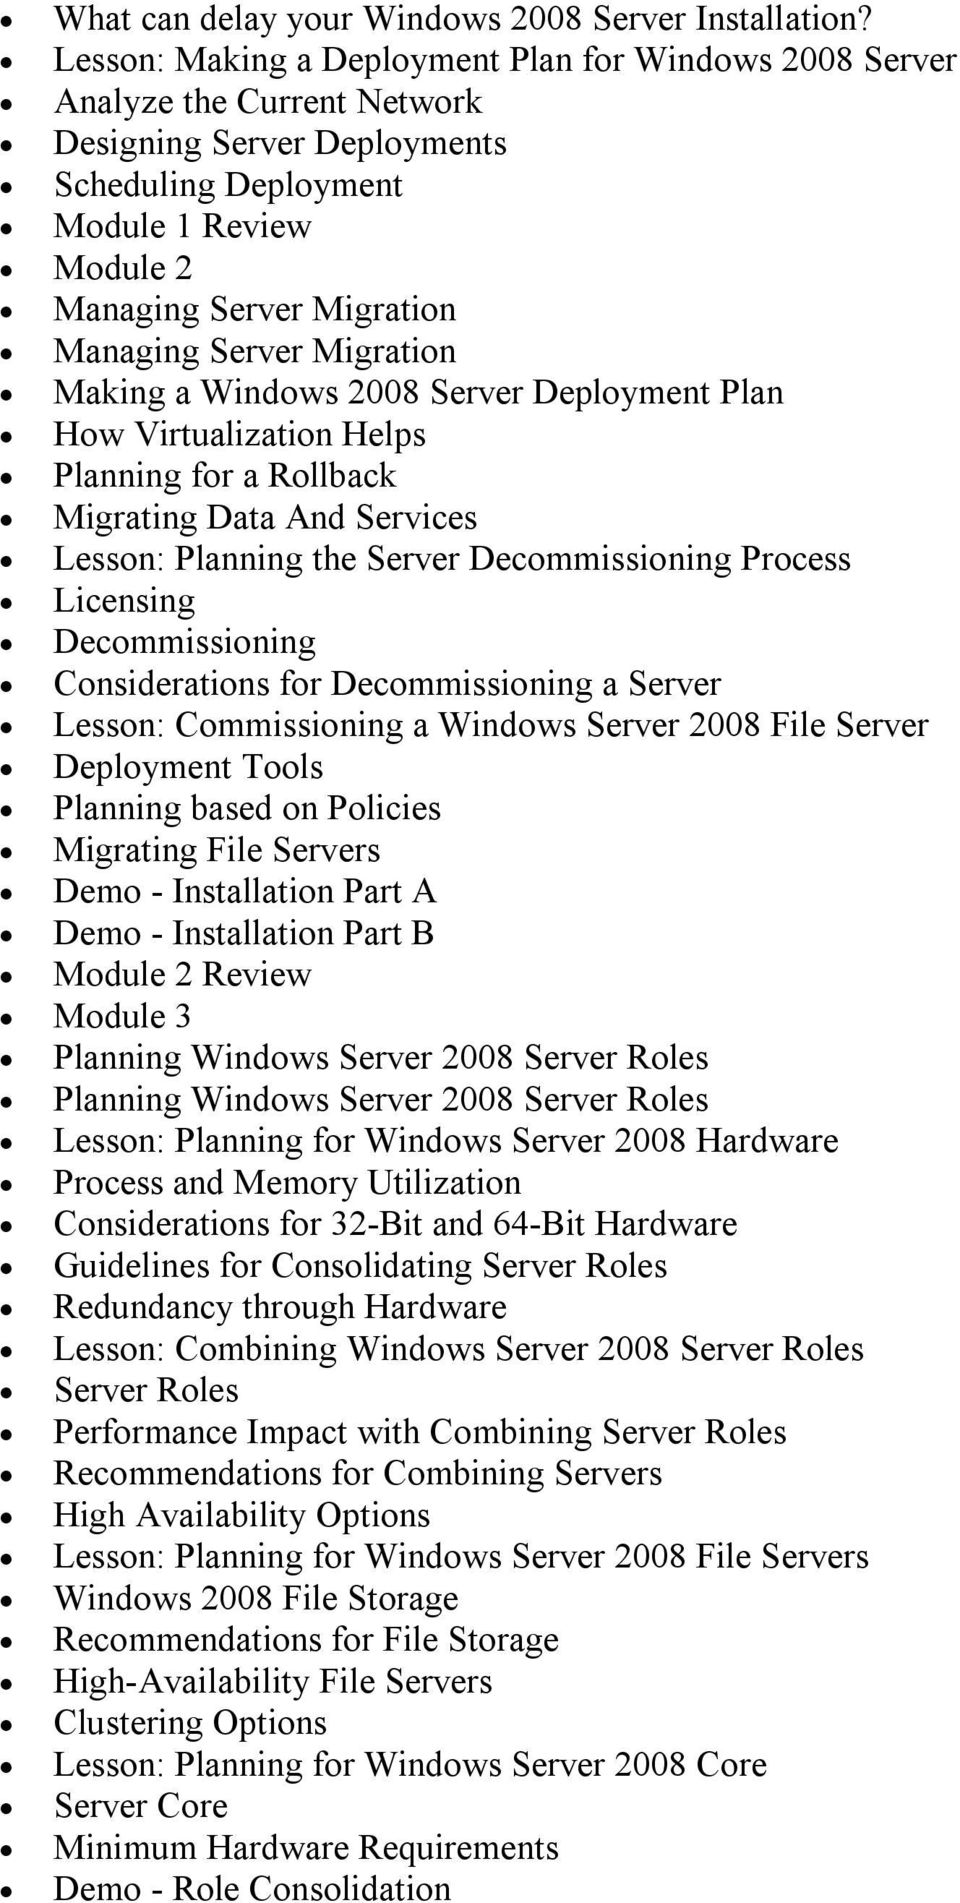 Server Migration Making a Windows 2008 Server Deployment Plan How Virtualization Helps Planning for a Rollback Migrating Data And Services Lesson: Planning the Server Decommissioning Process